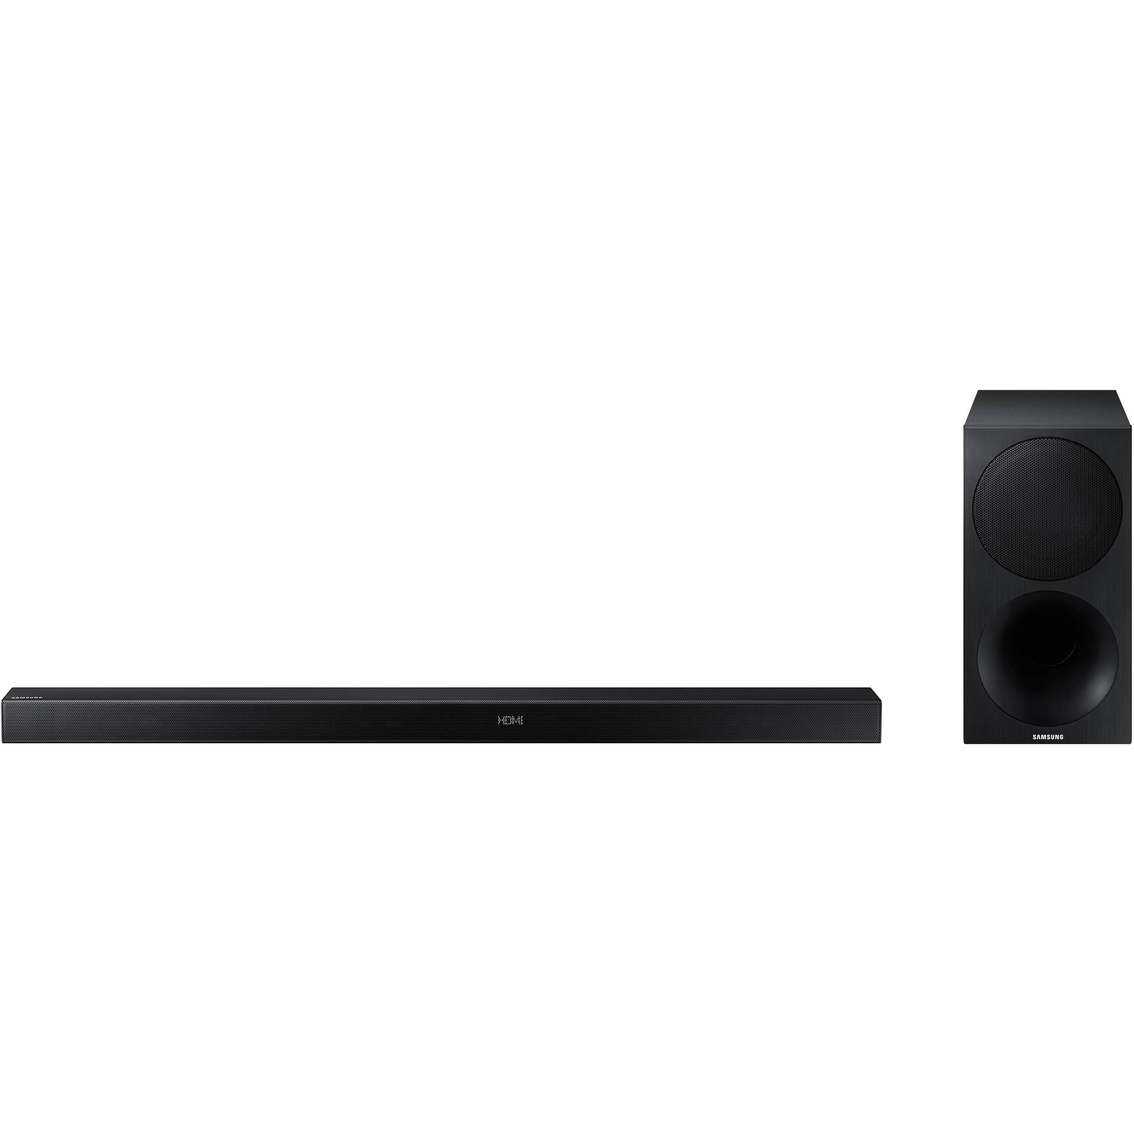 Samsung 3.1-Channel Soundbar System with Wireless Subwoofer - Image 3 of 4